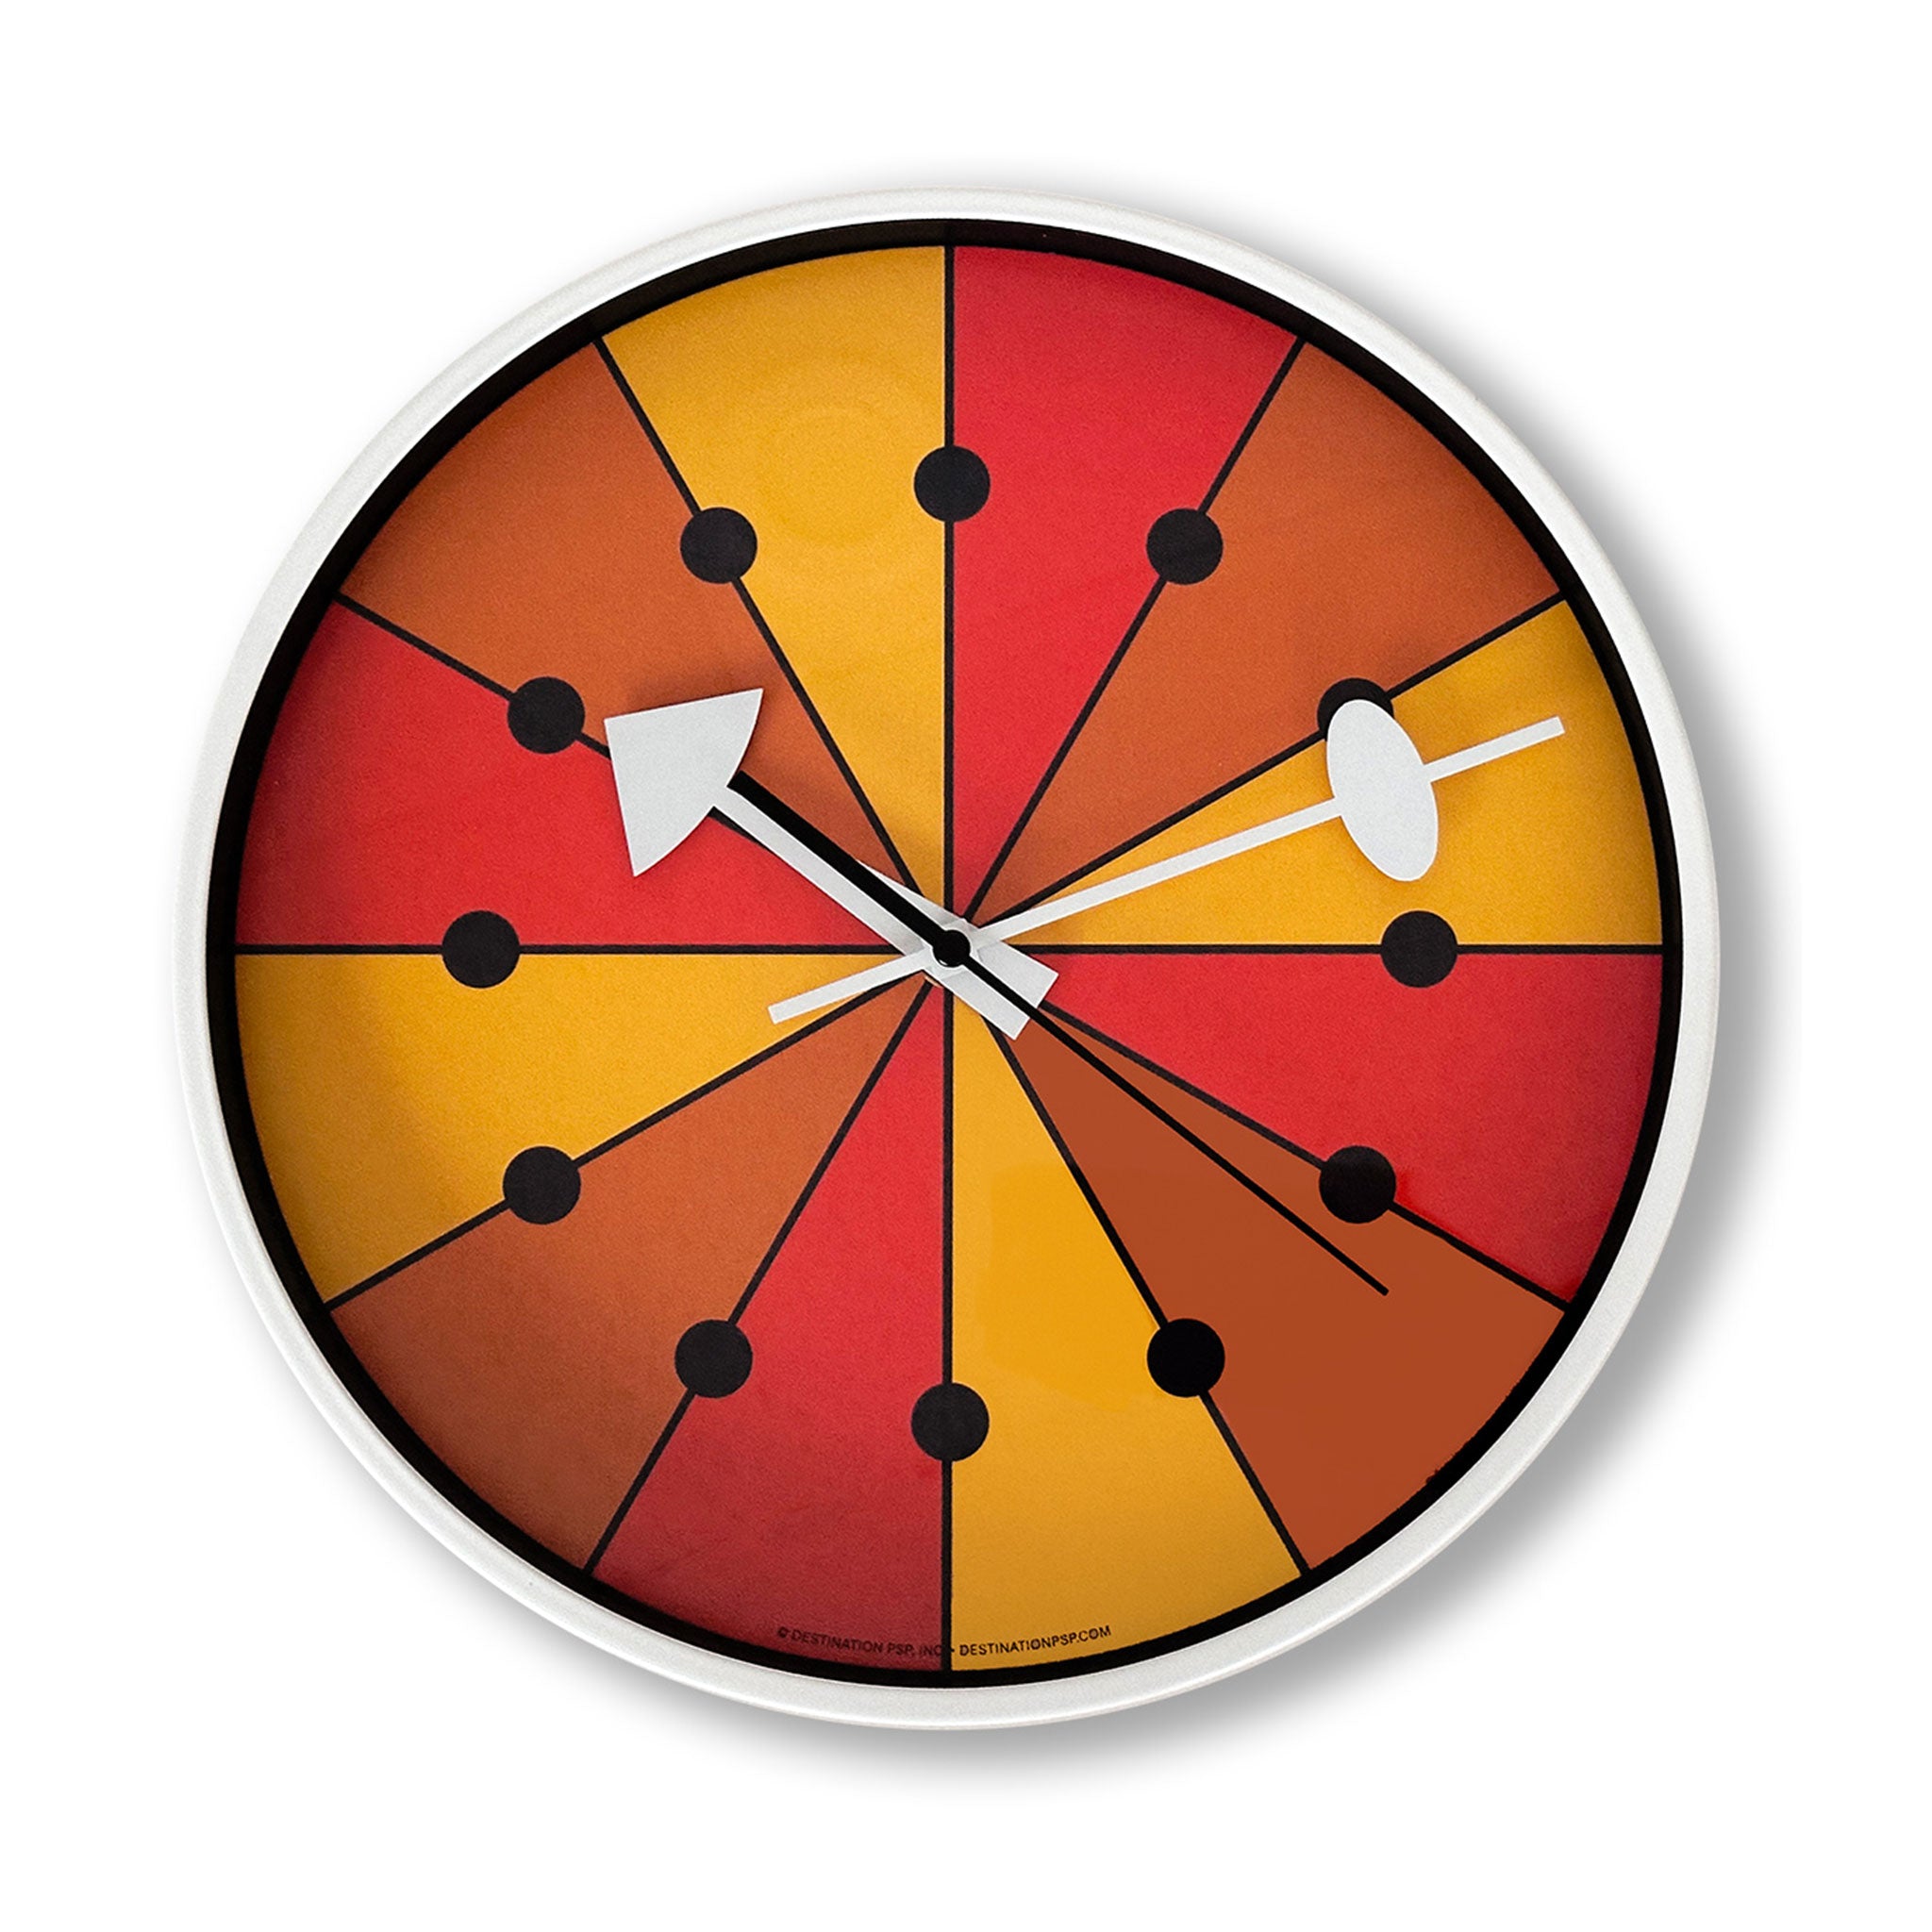 A mod orange yellow and red wall clock with white hands and rim.